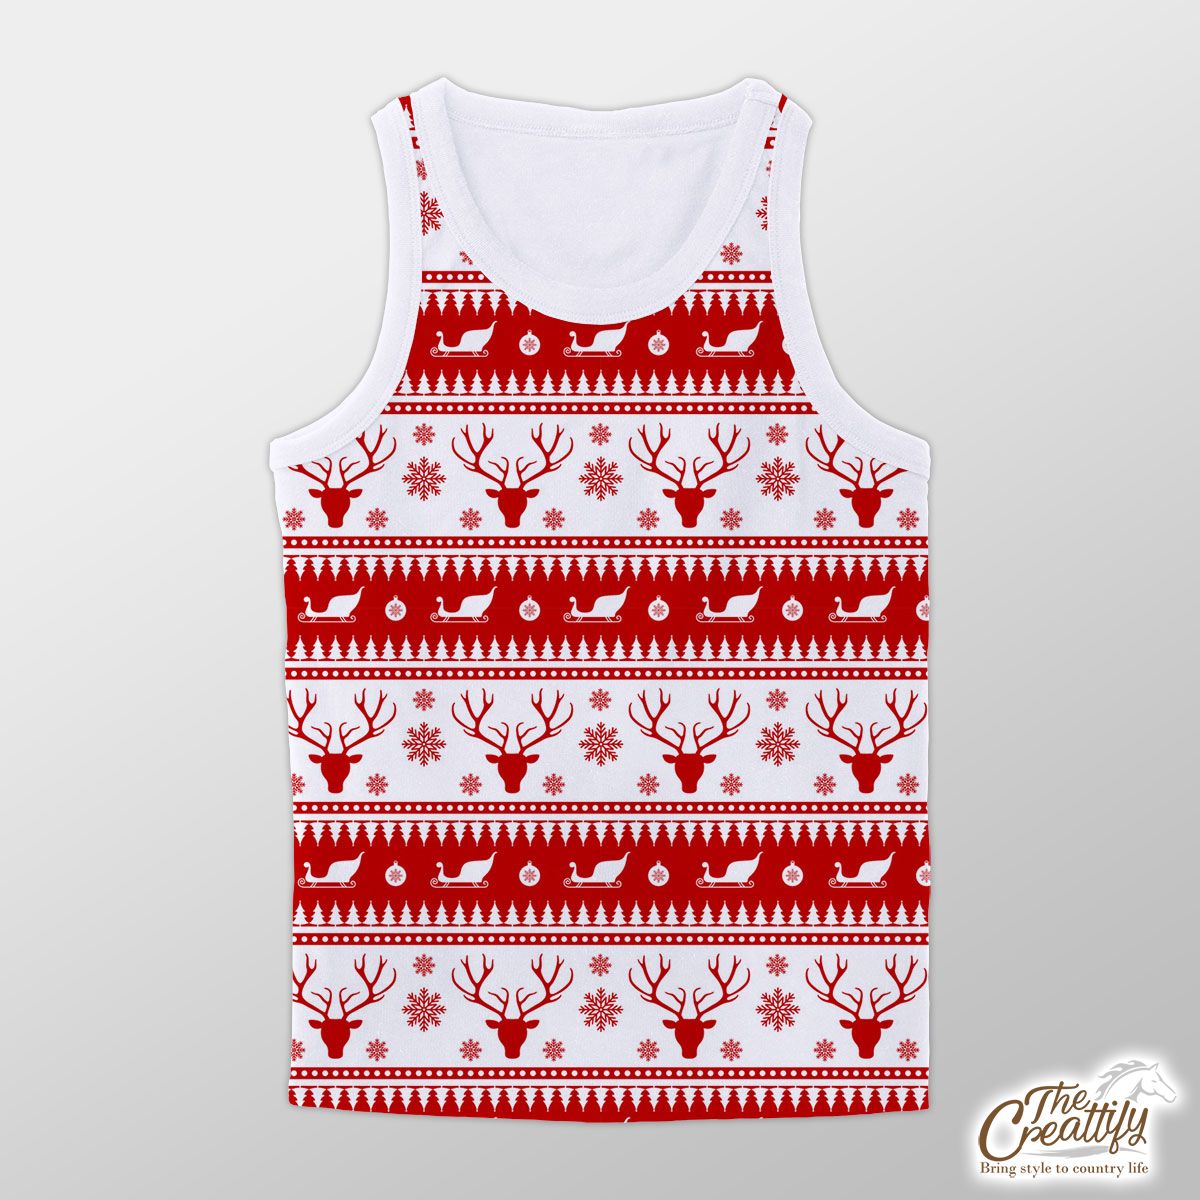 Red And White Reindeer, Santa Sleigh, Christmas Balls On The Snowflake Background Unisex Tank Top